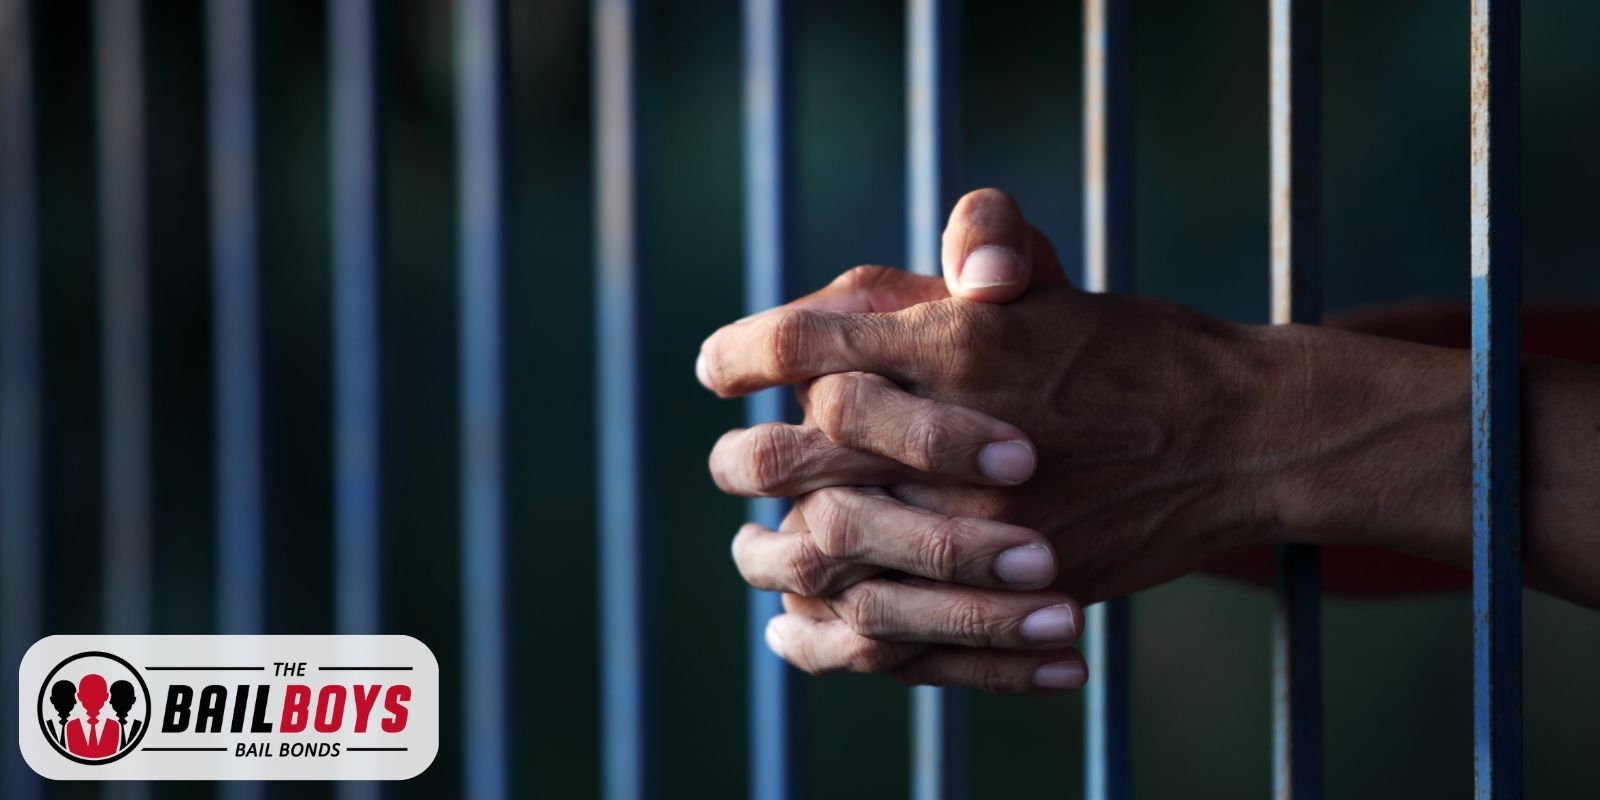 How Quickly Can I Be Released from Jail With a Bail Bond?